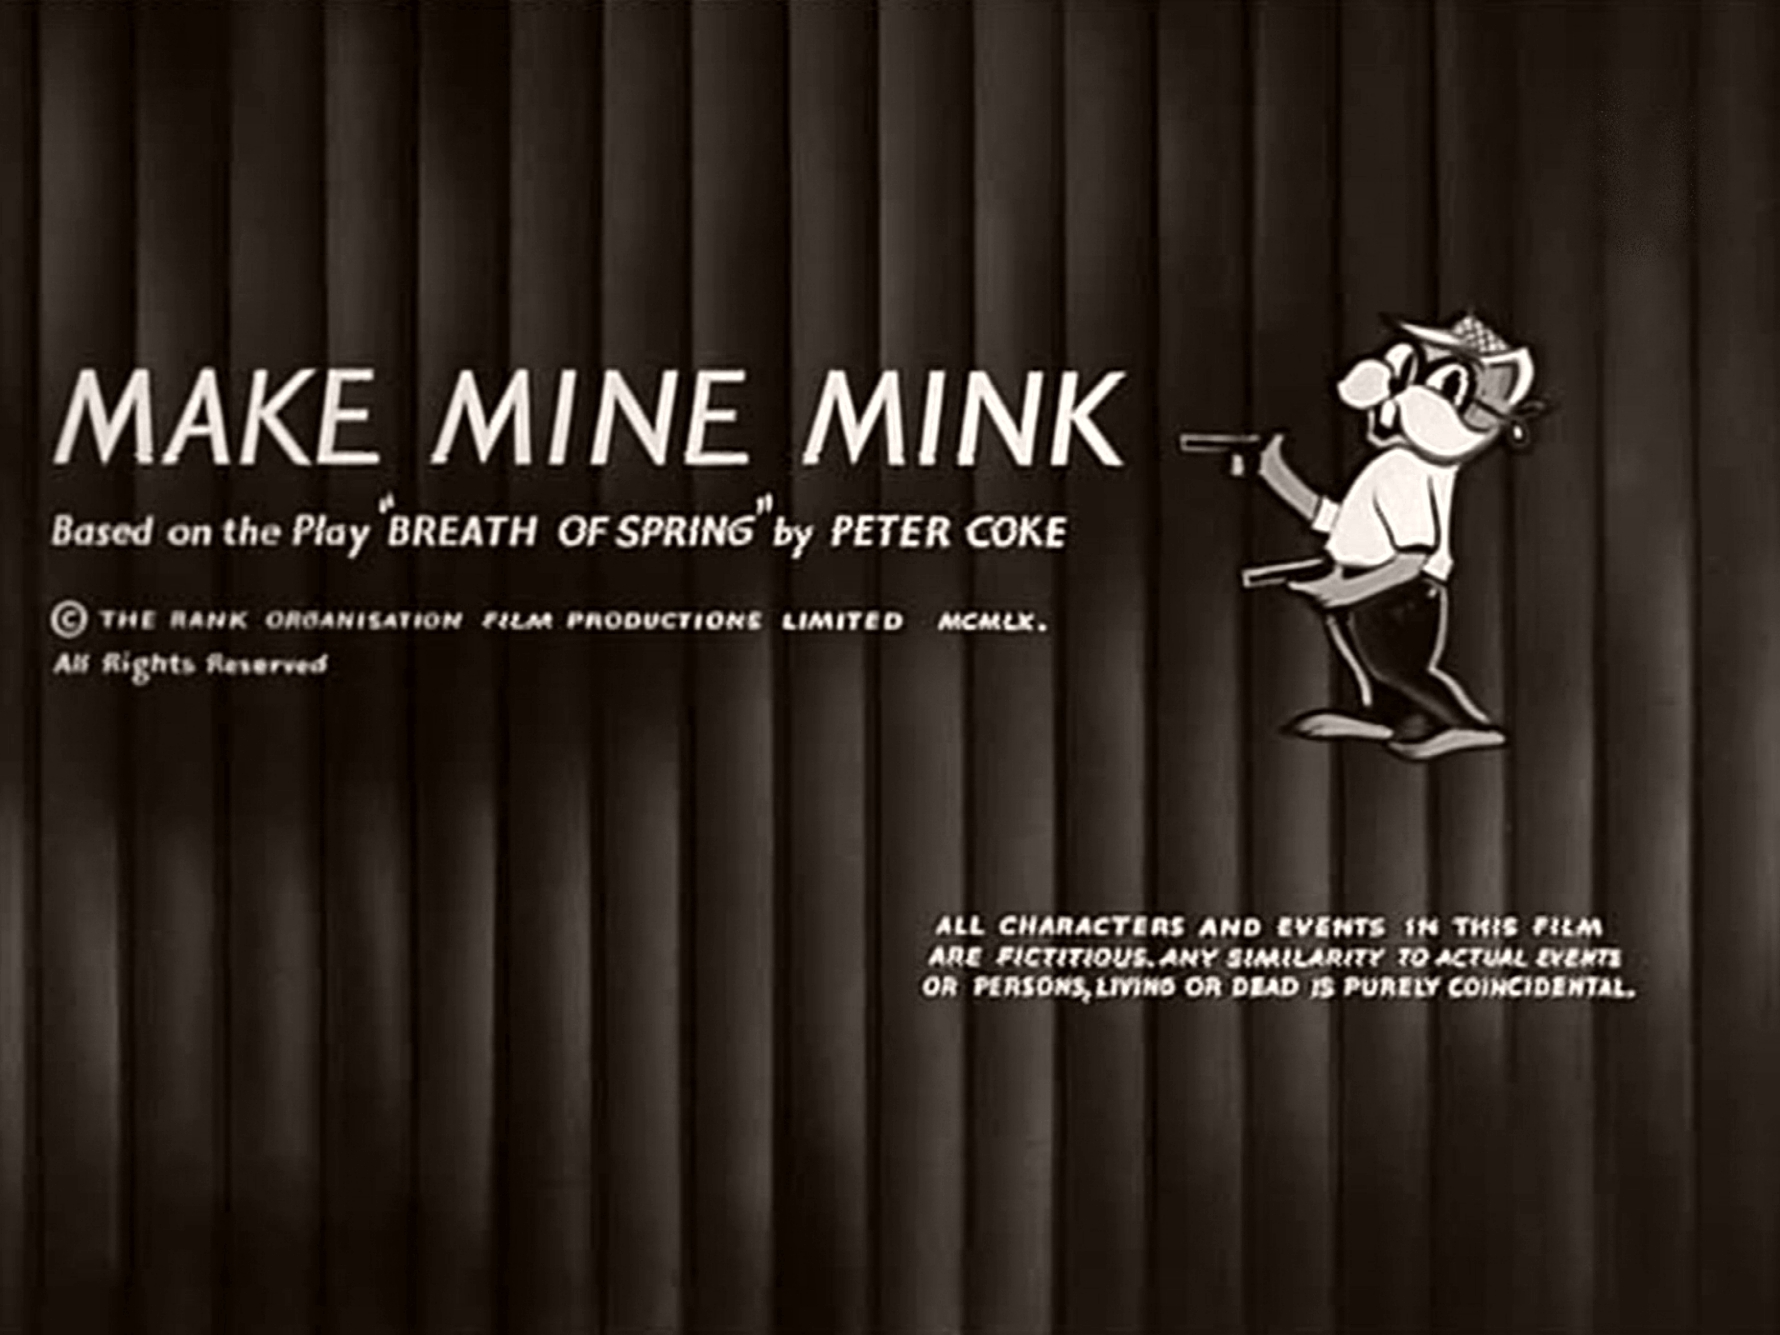 Main title from Make Mine Mink (1960) (4)  Based on the play ‘Breath of Spring’ by Peter Coke  Copyright the Rank Organisation Film Productions Limited 1960  All rights reserved